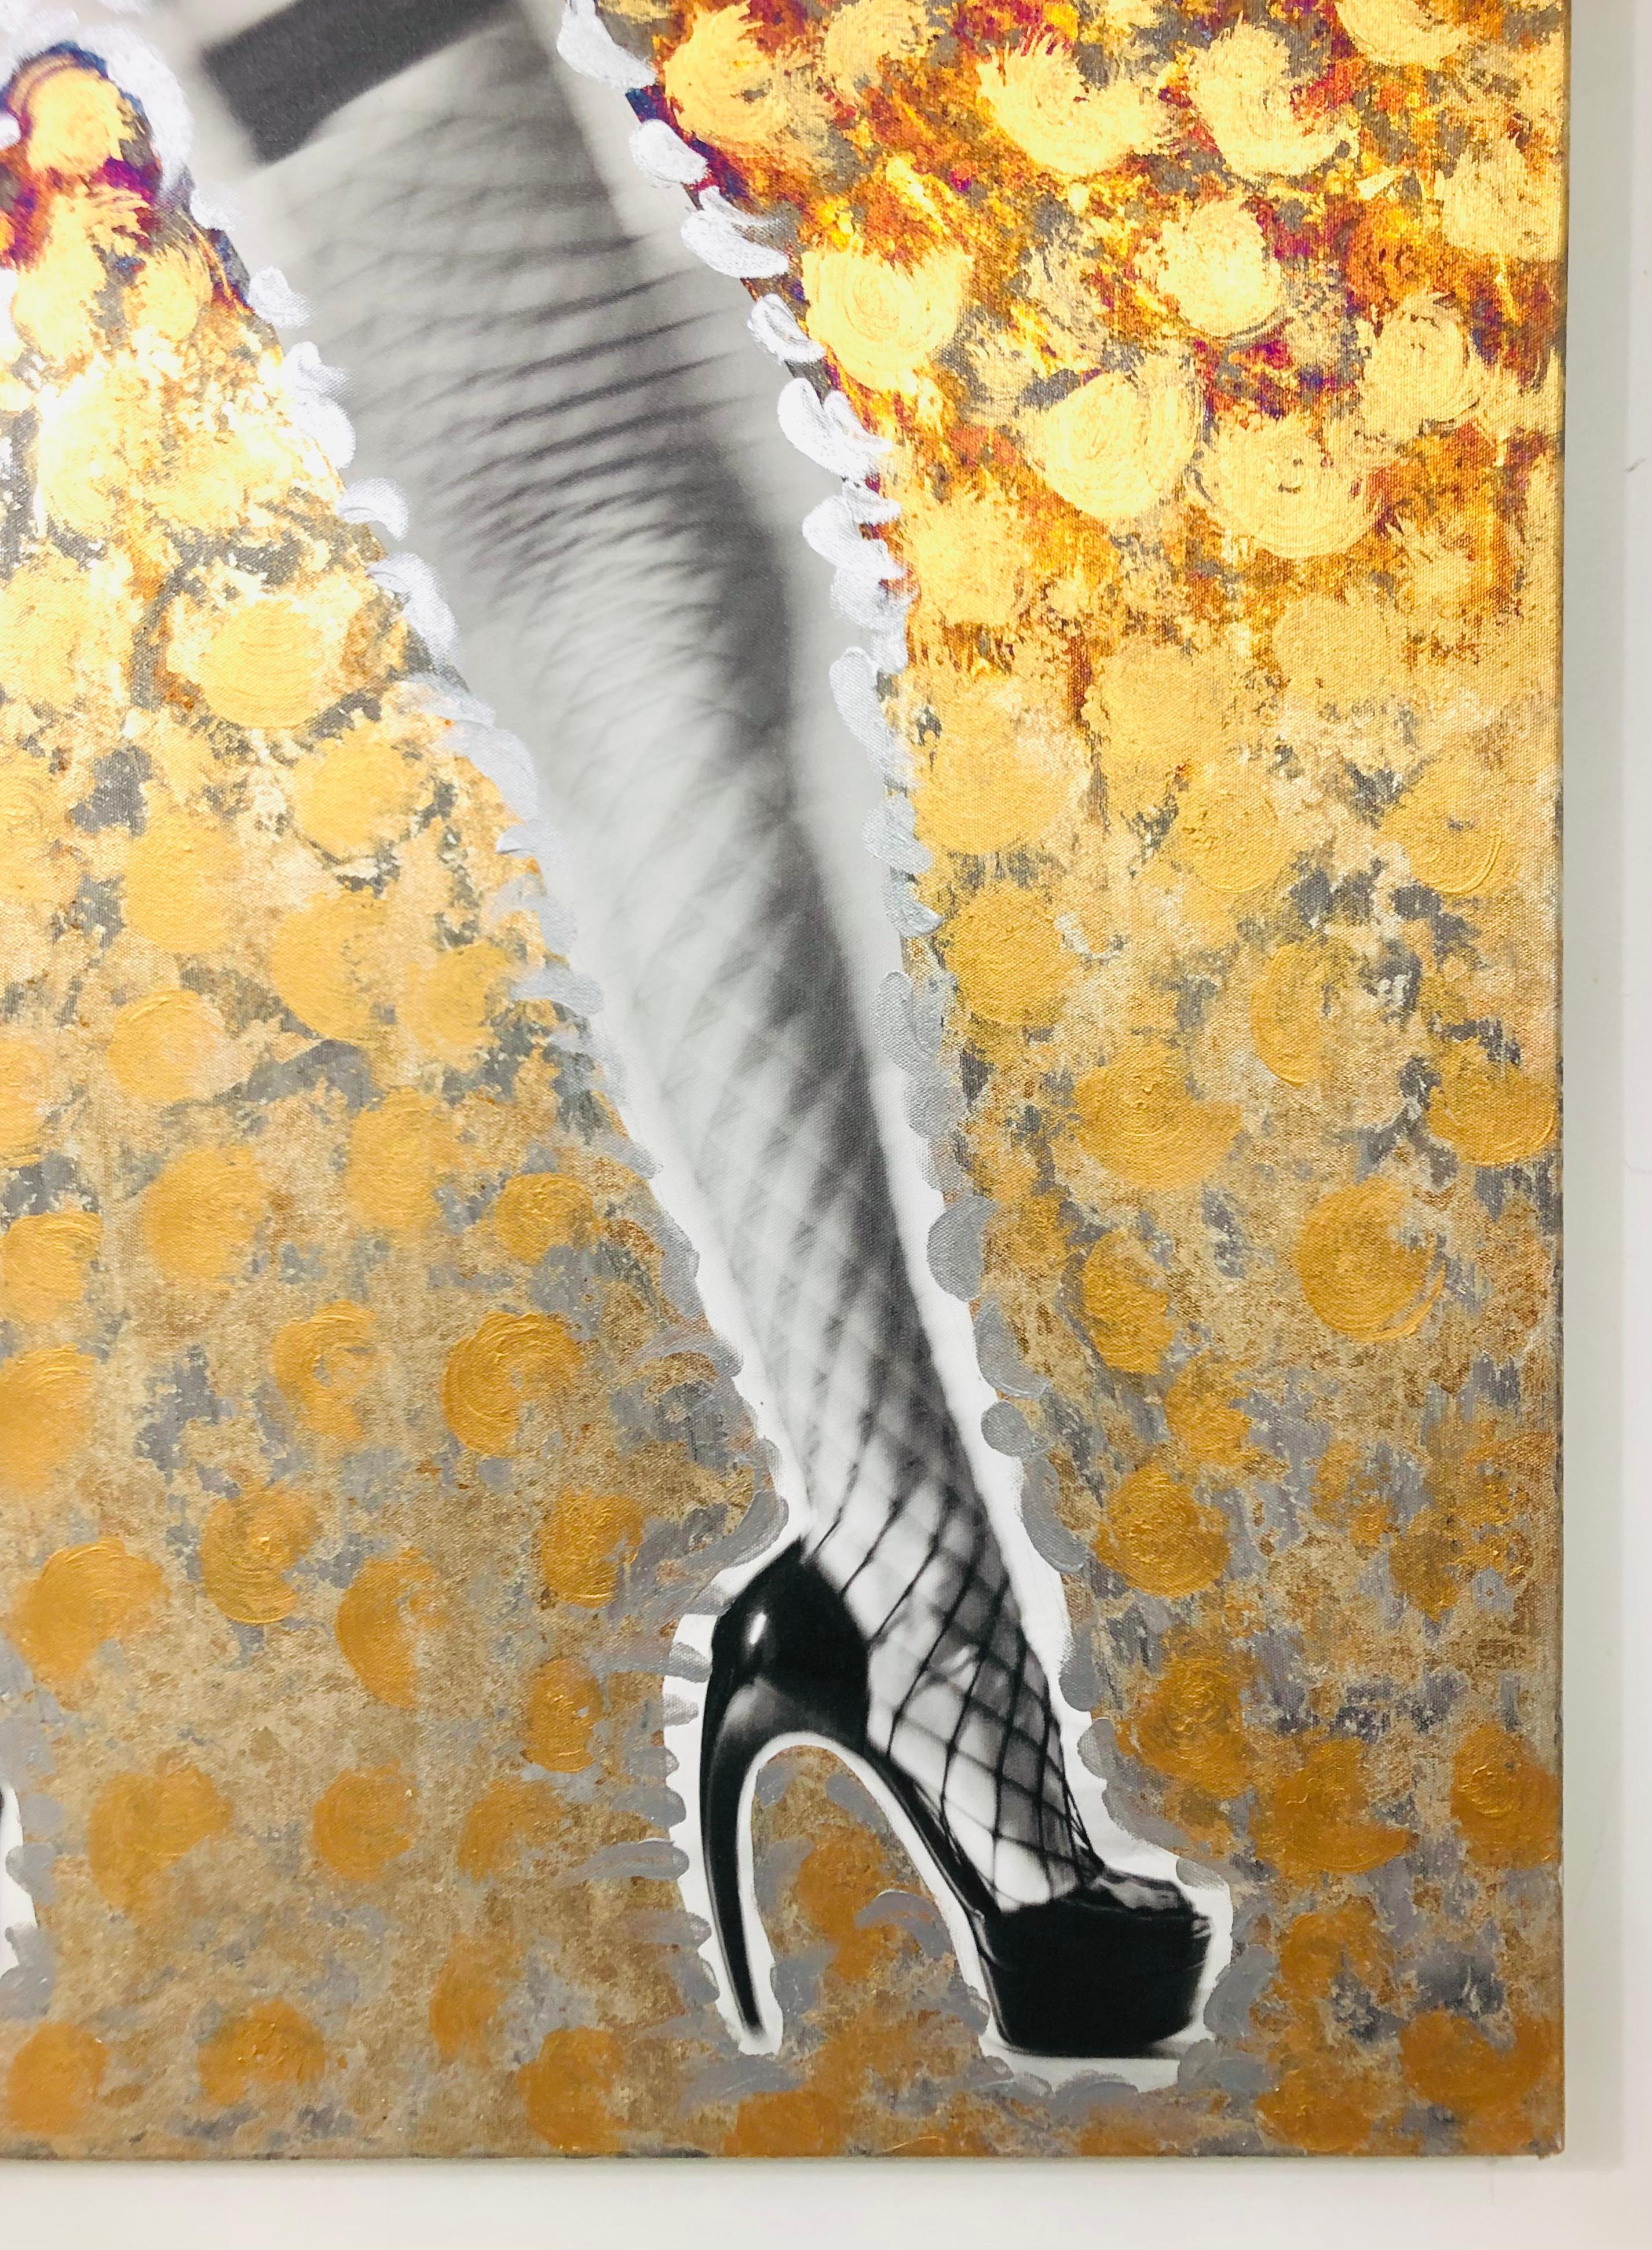 A sensual pop art mixed media paint and photography on canvas by Luciana Pampalone ( American, 1963). The large mixed media depicts a photography of a woman 's legs dressed in sexy fishnet stocking and wearing black high heel shoes. The photography